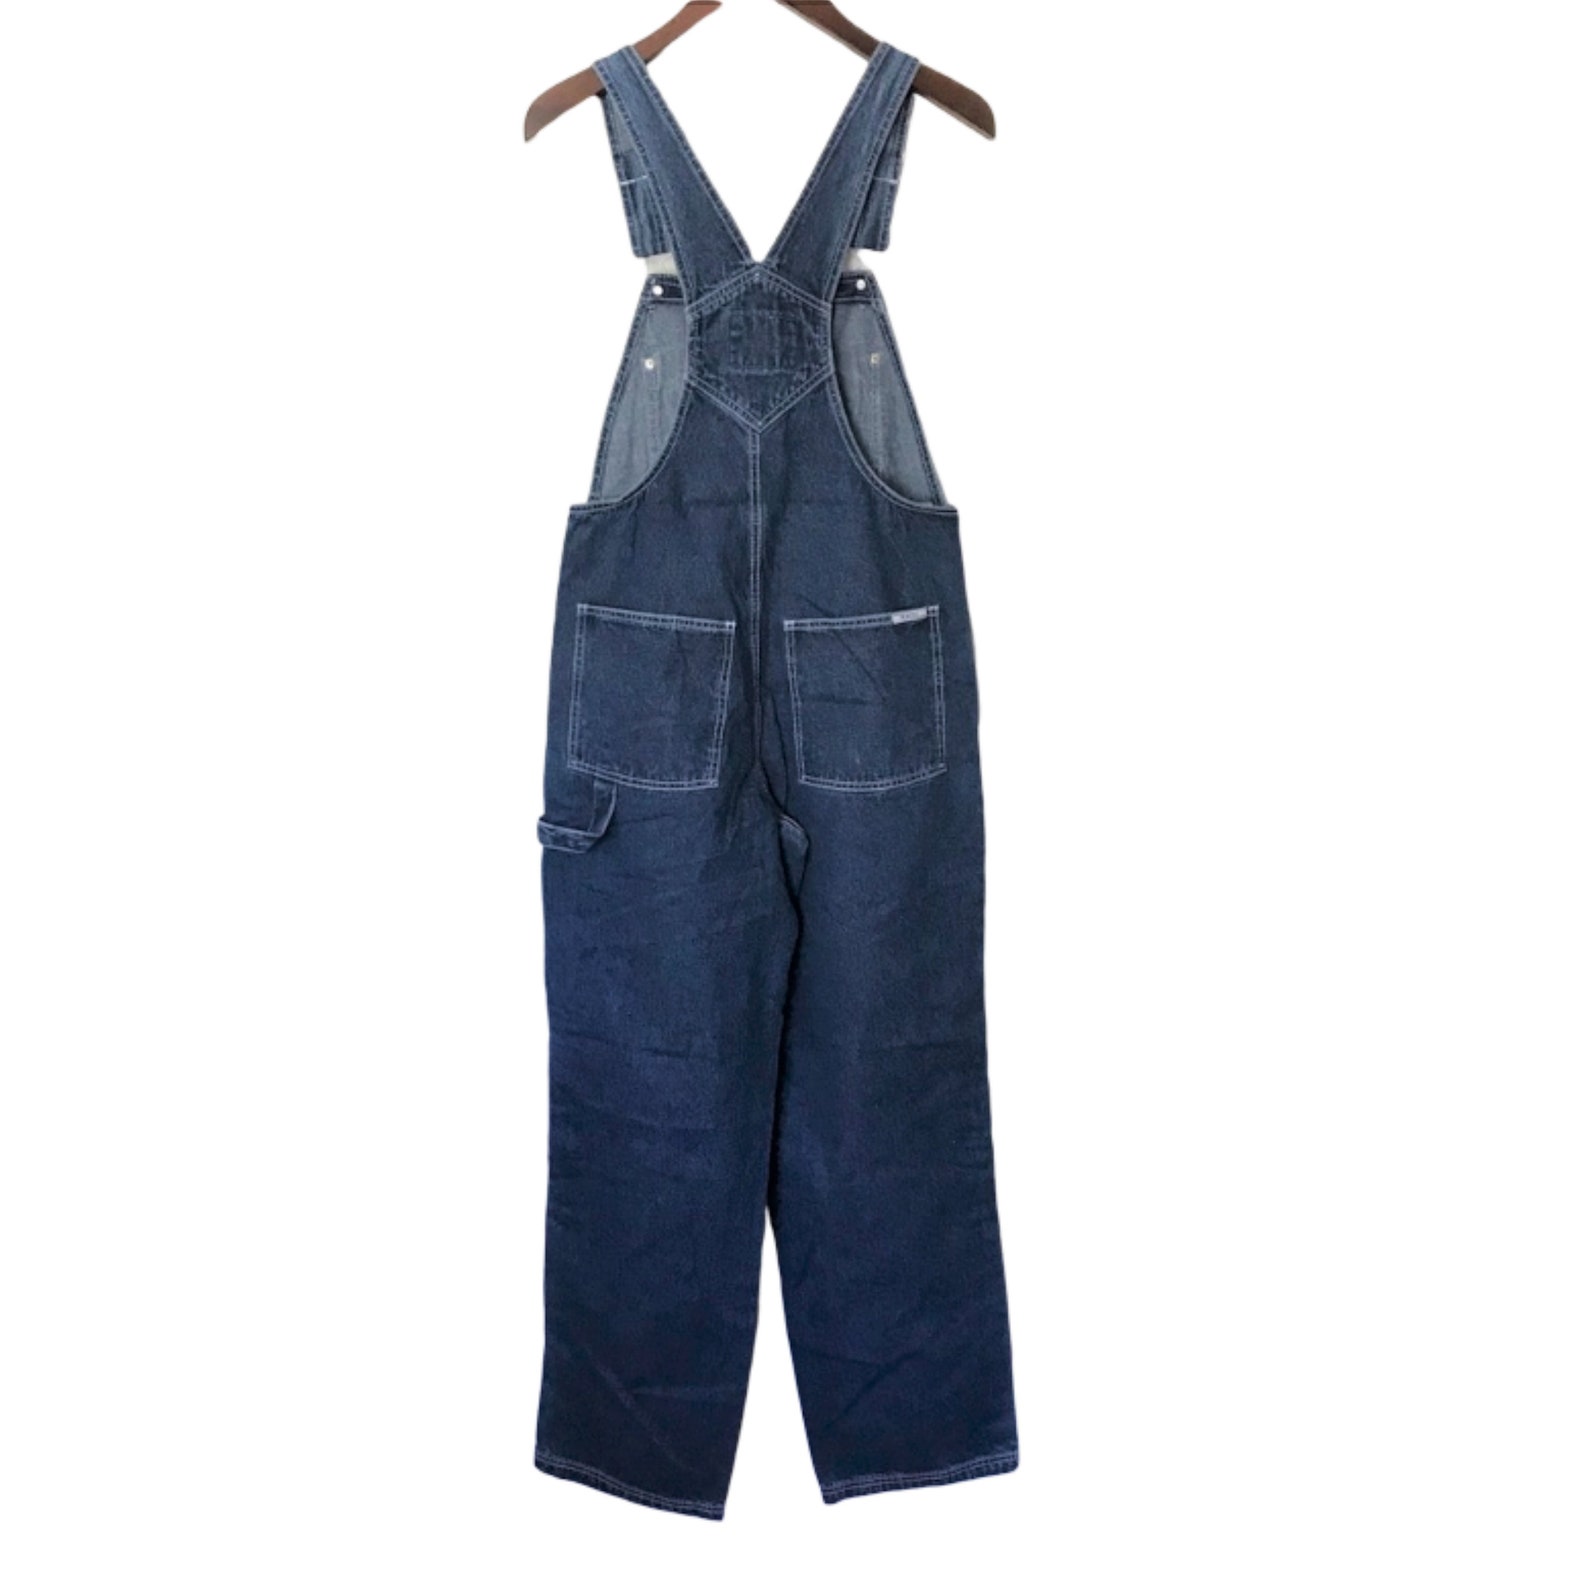 Vintage Women Denim Overall Y2K Clothing Early 2000s Clothing Festival ...